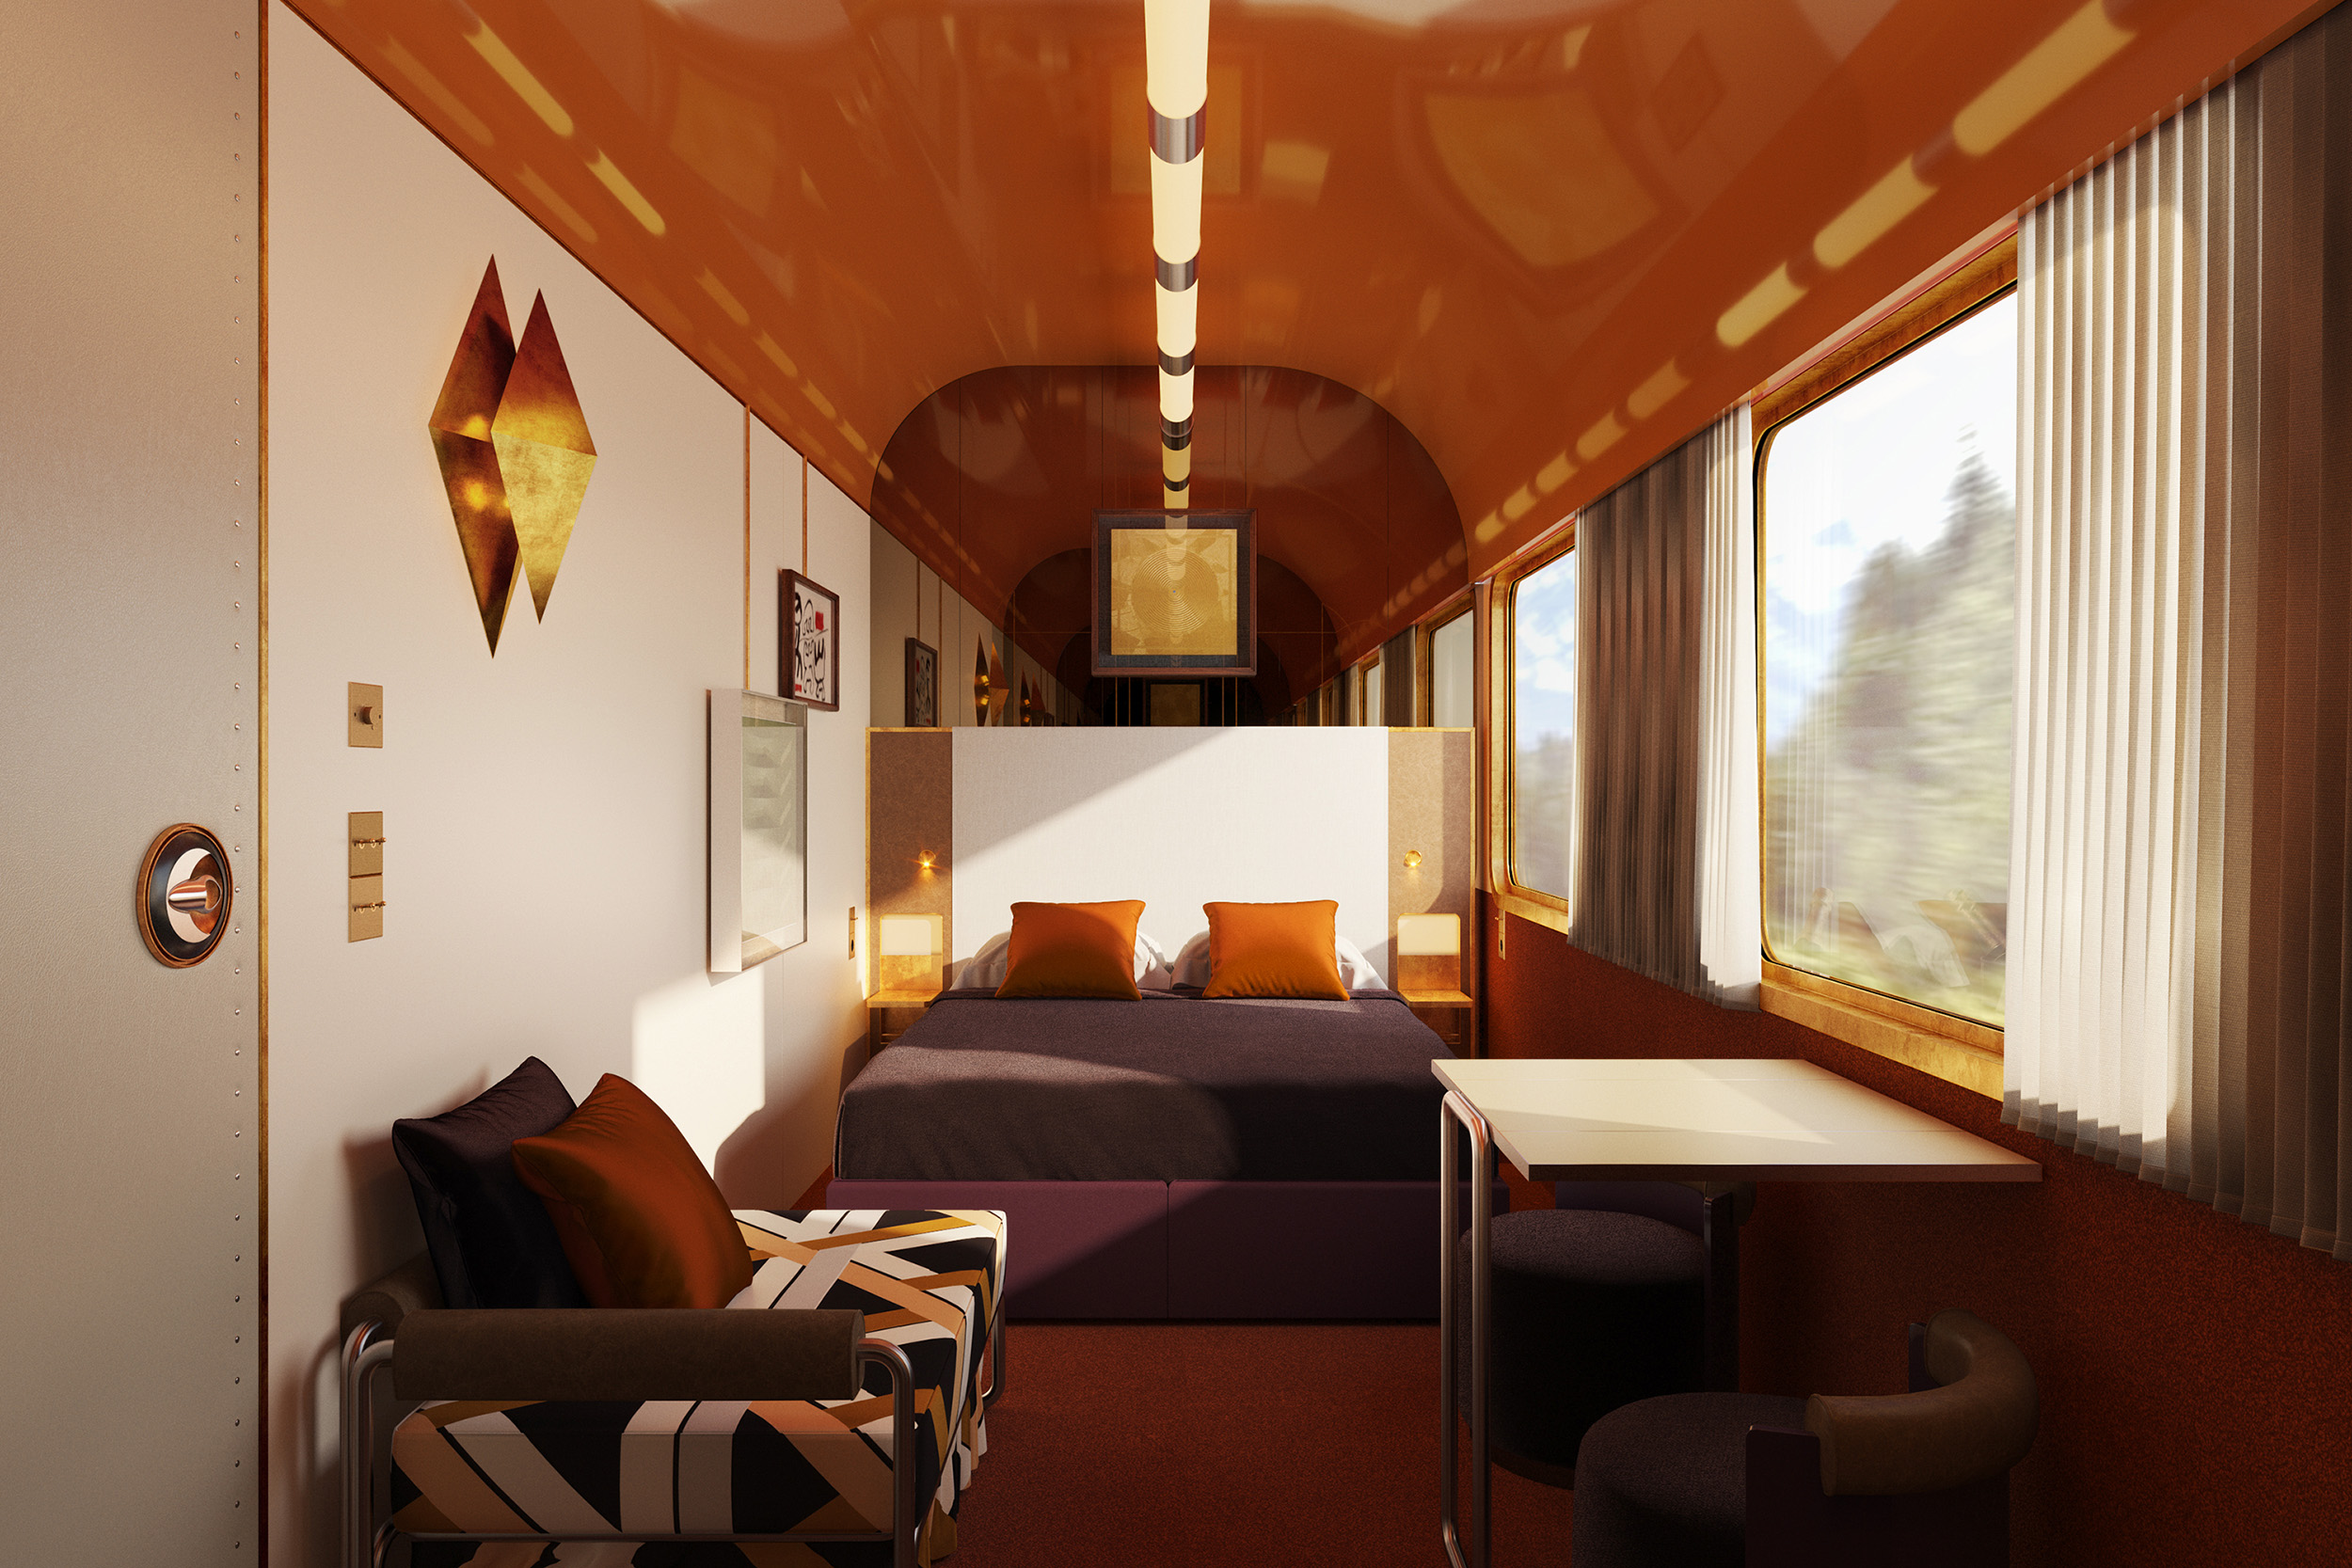 Interiors inspiration: Inside the new Orient Express Grand Suites